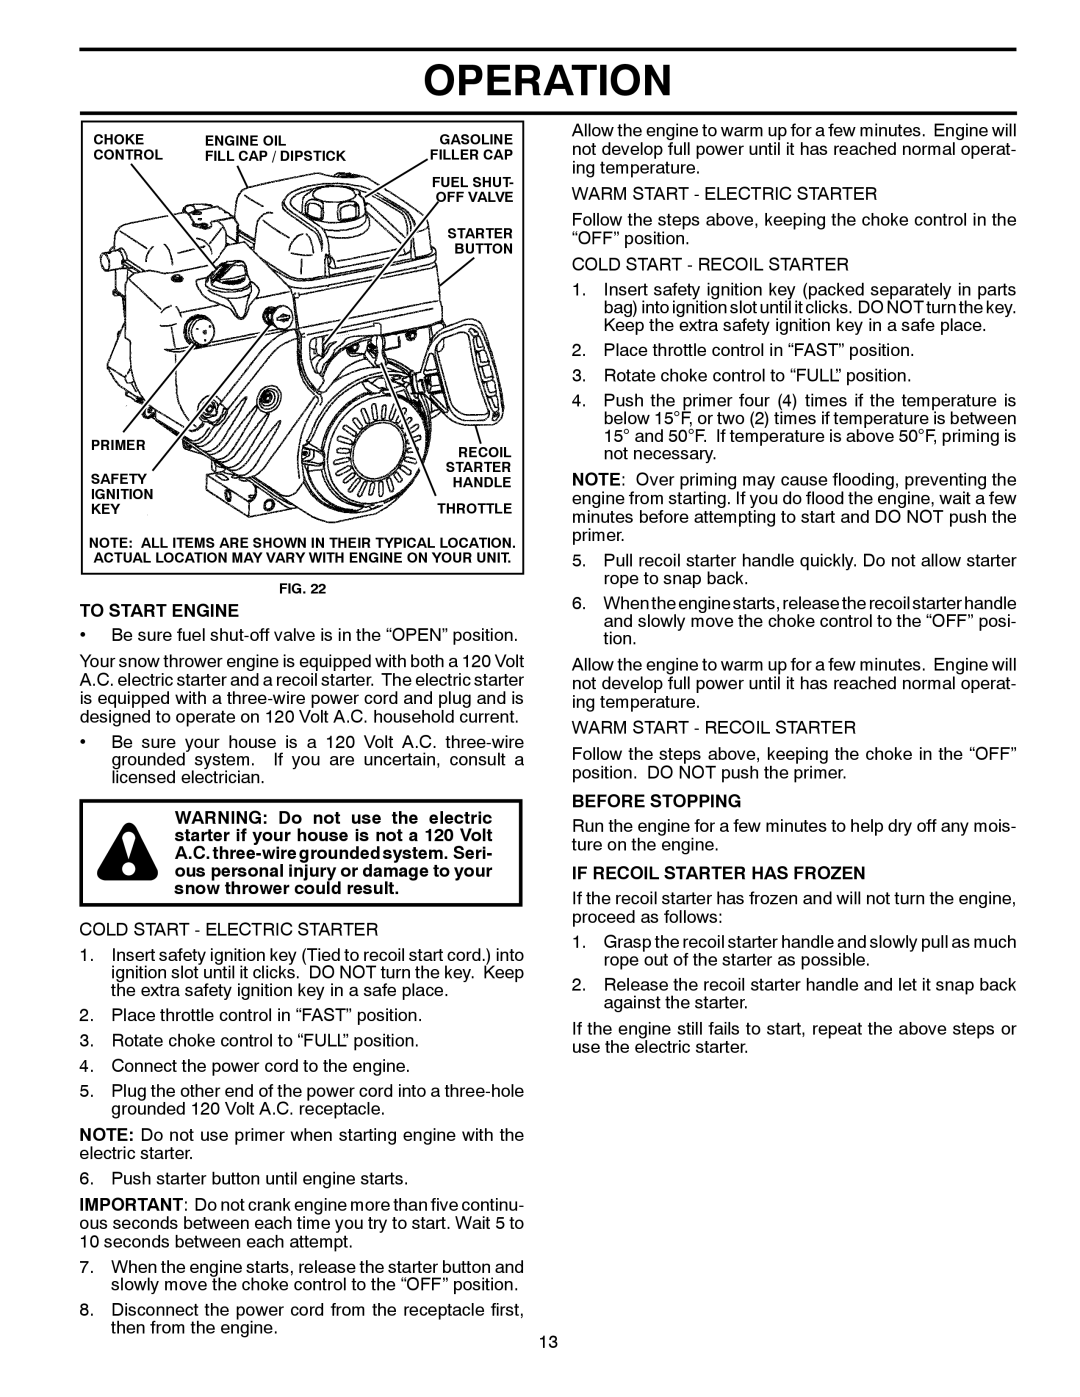 Husqvarna 13524SB-XLS owner manual Operation, To Start Engine, Before Stopping, If Recoil Starter Has Frozen 